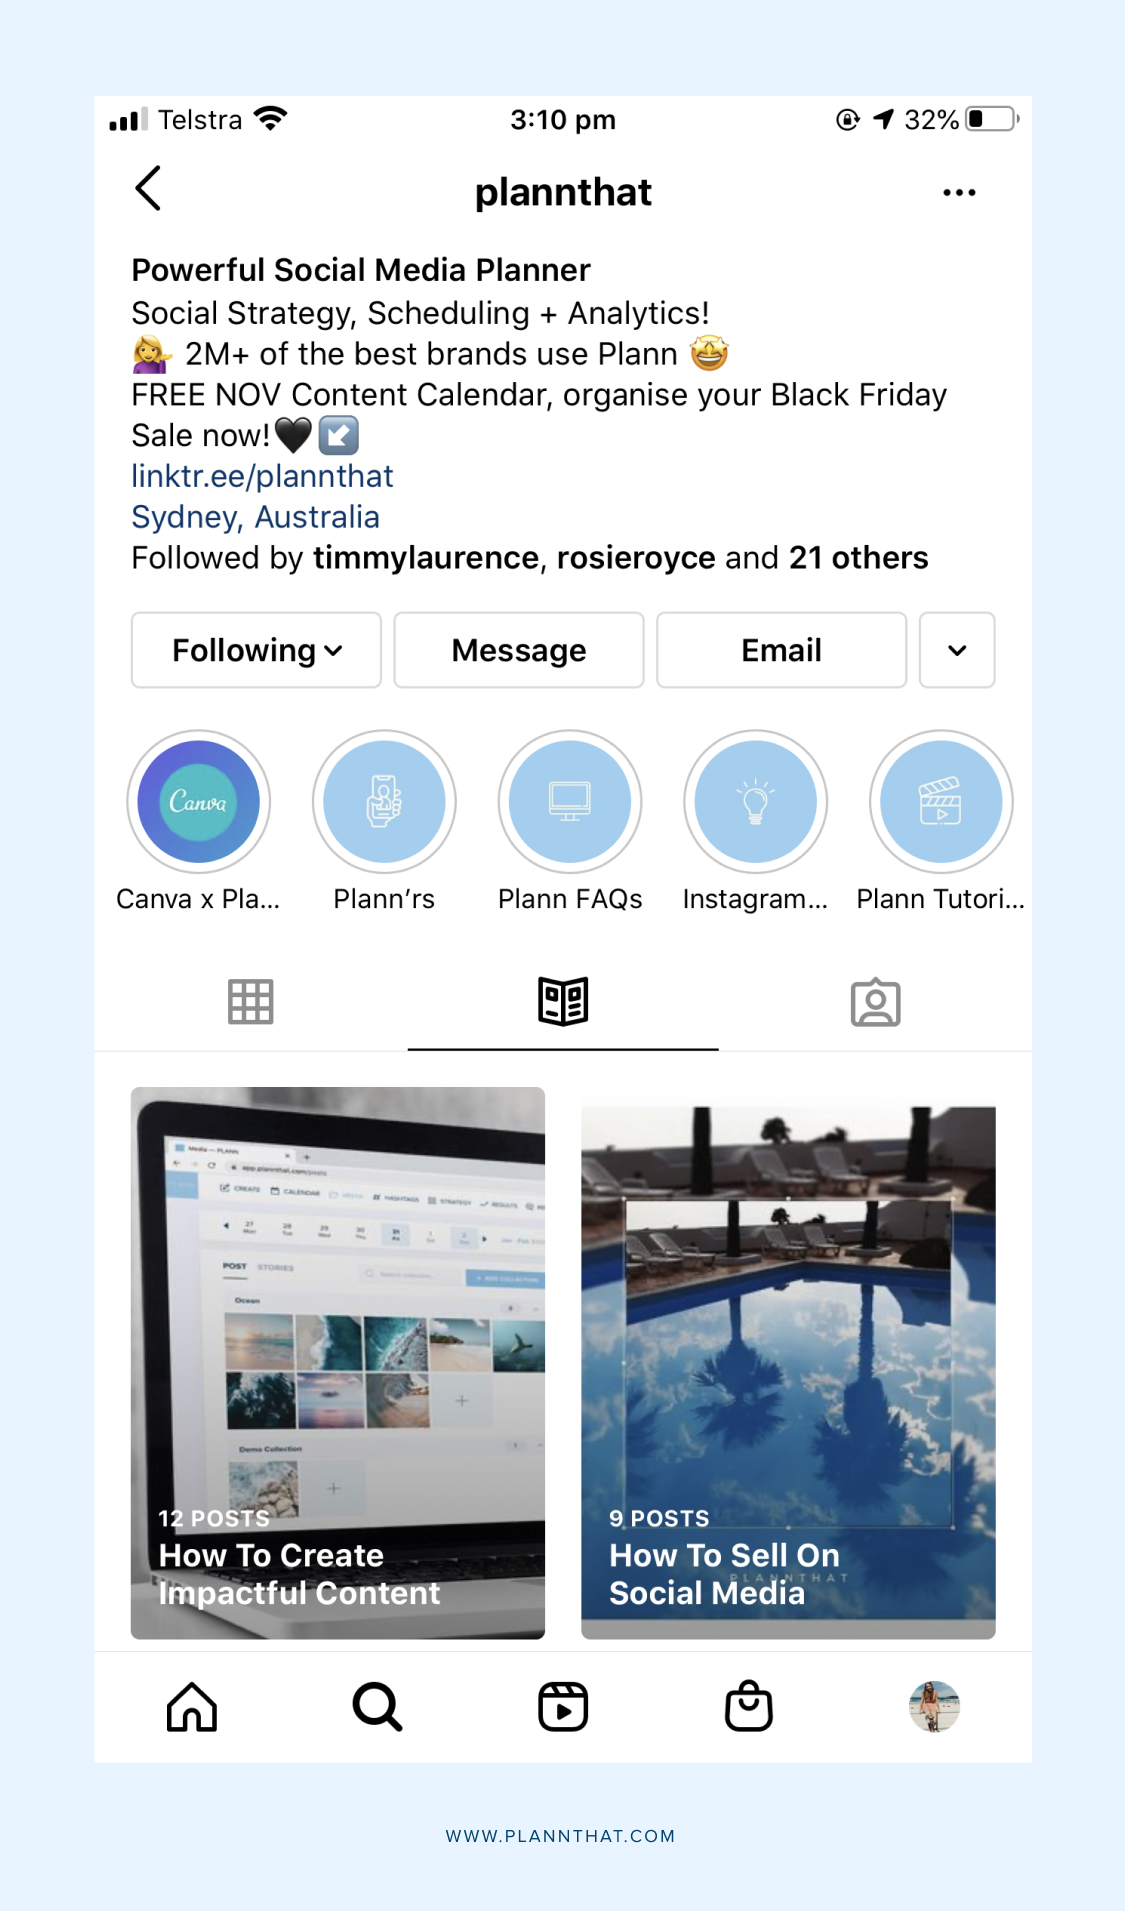 5 HUGE new updates that will change the way you use social media